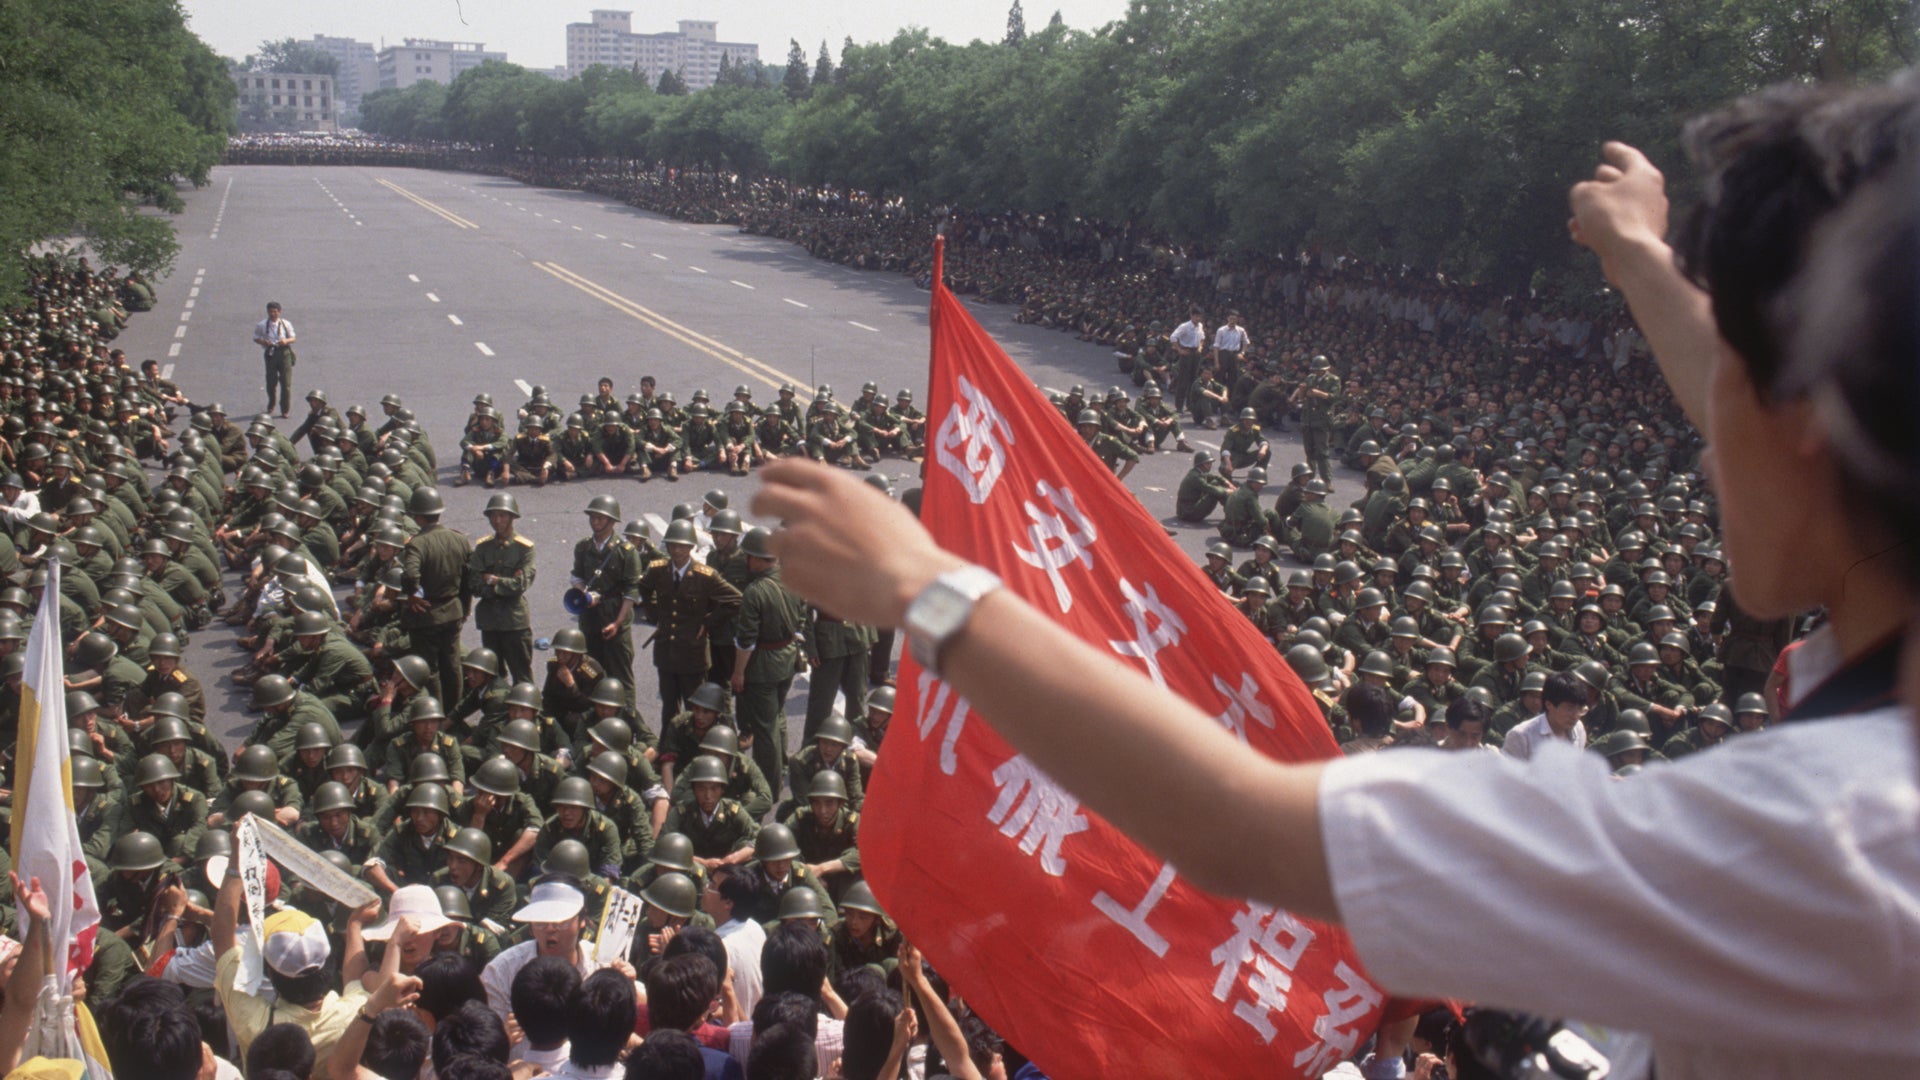 People 1920x1080 Beijing China people freedom Tiananmen Square crowds protestors group of people 1989 (year) Chinese Army soldier flag sitting